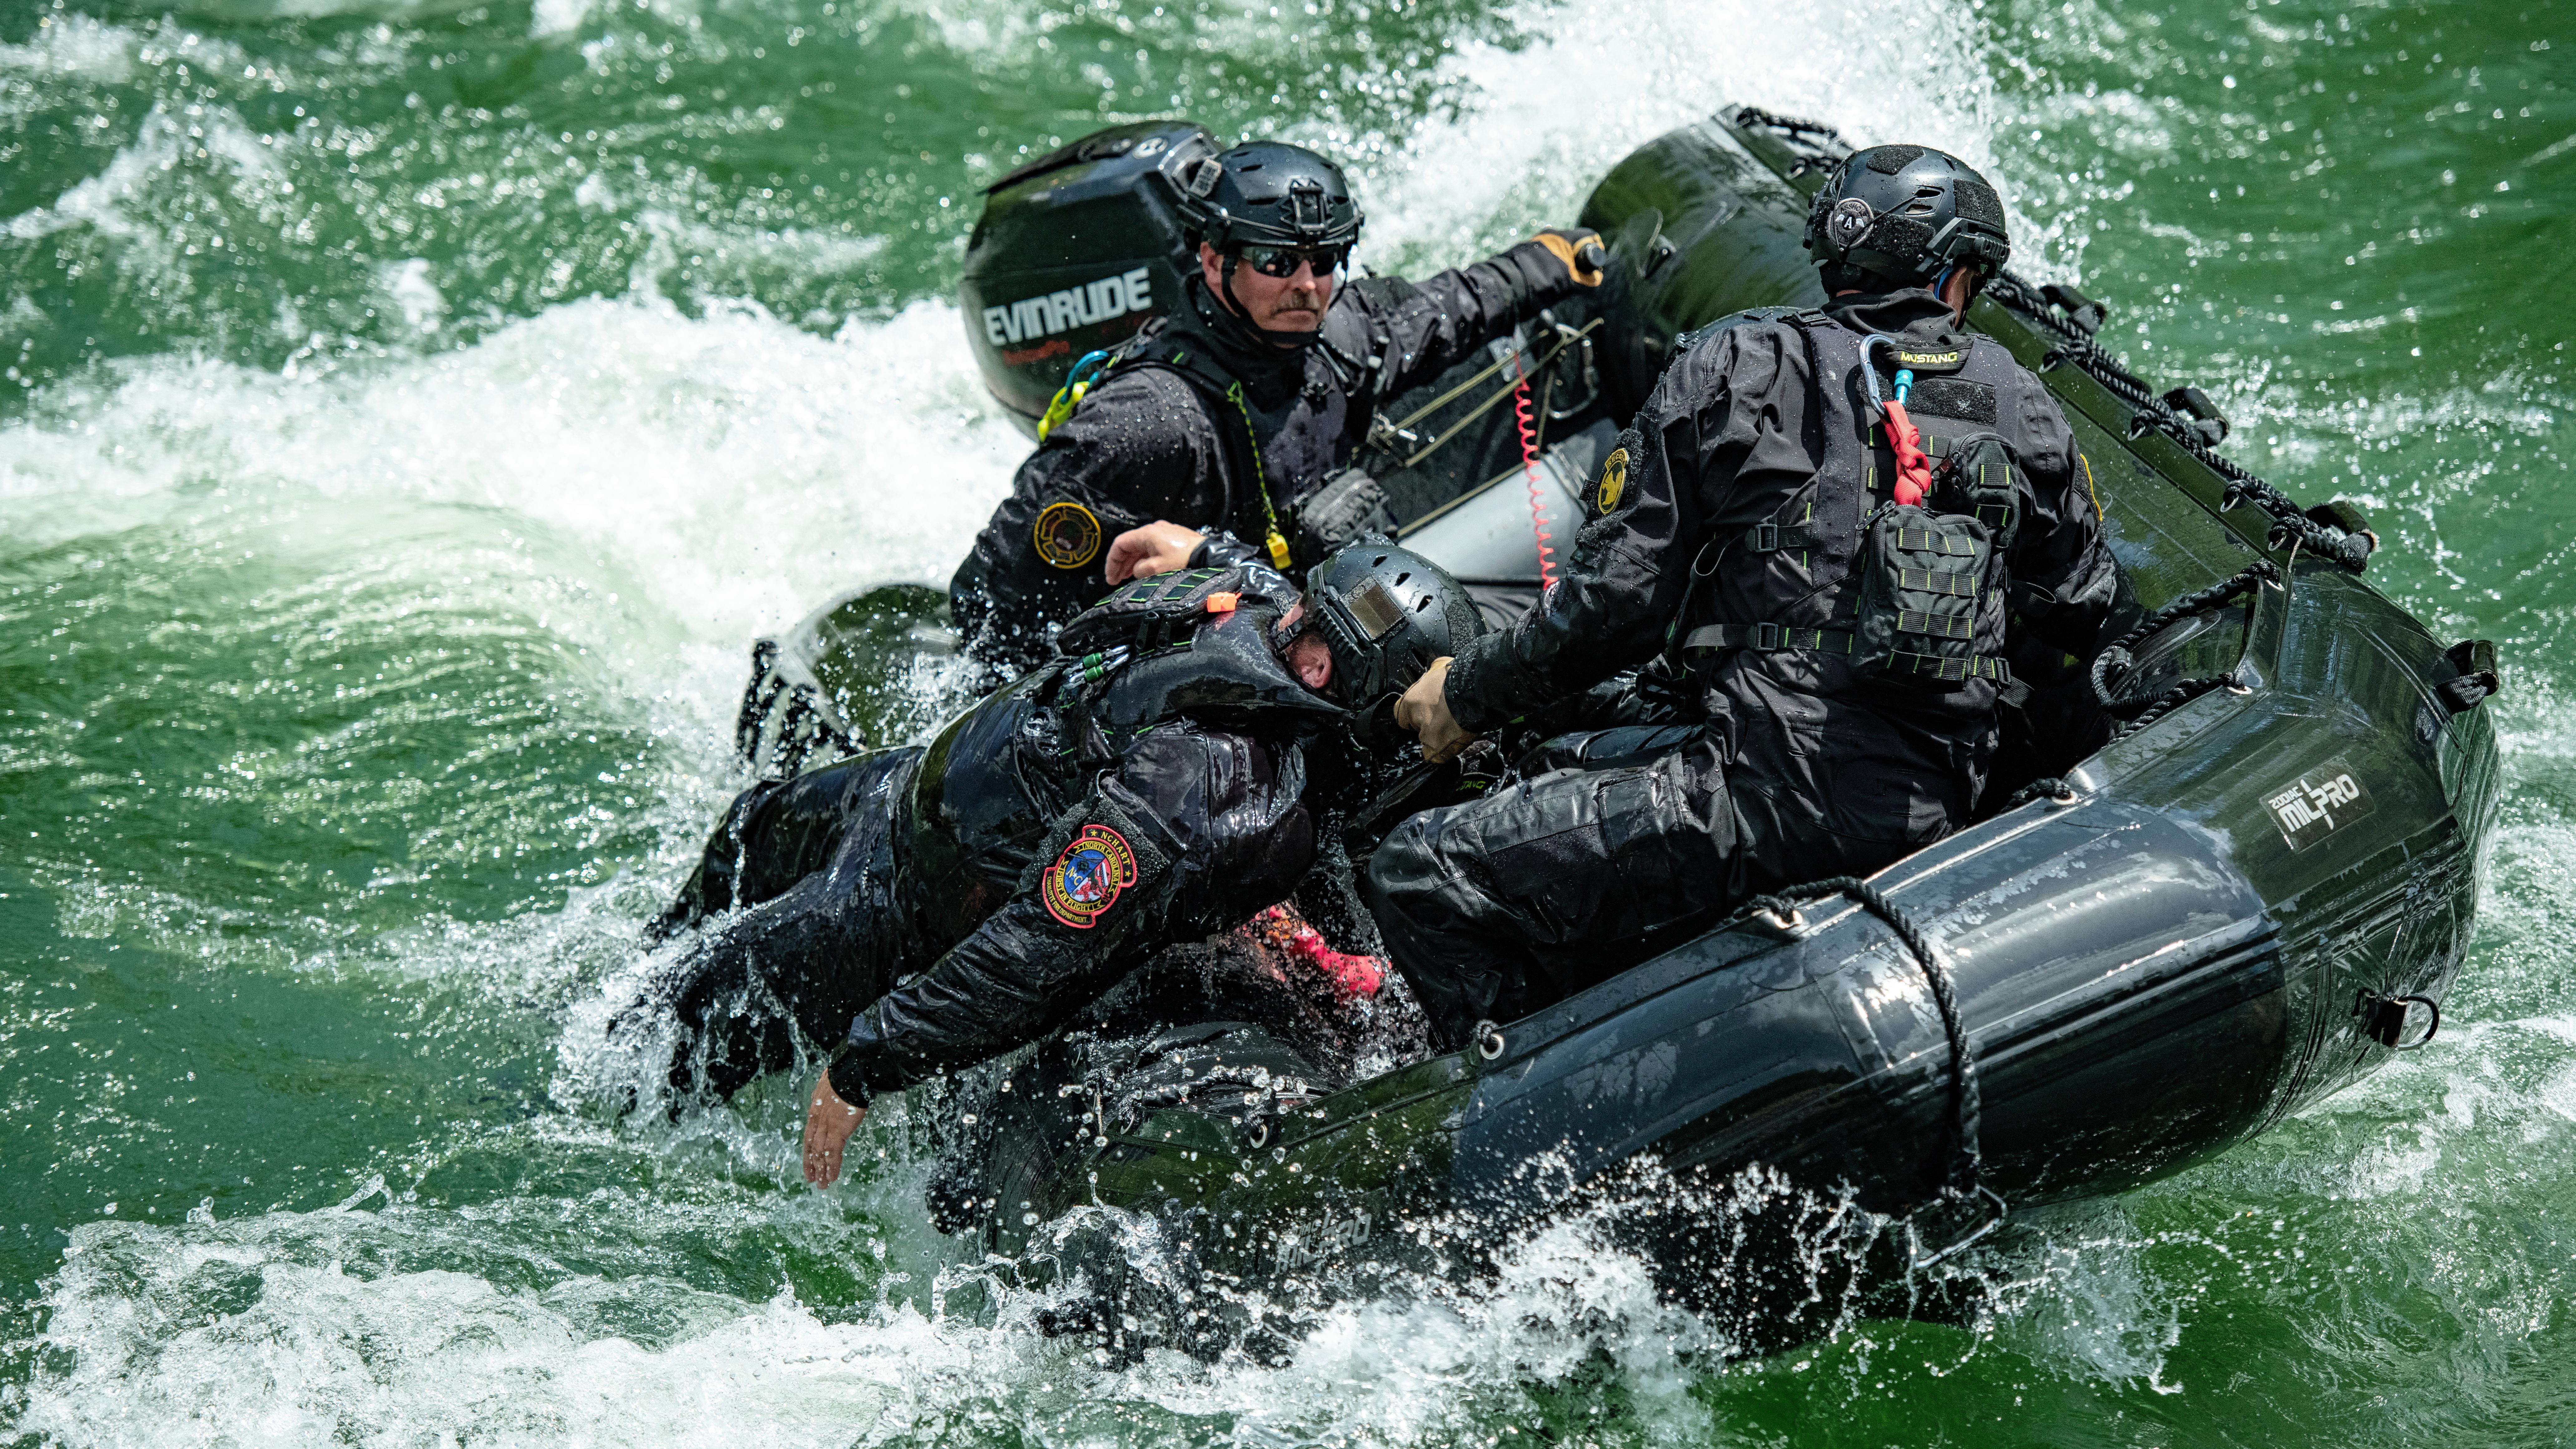 Chasing Frames with Tamara Lackey, Swift Water Rescue